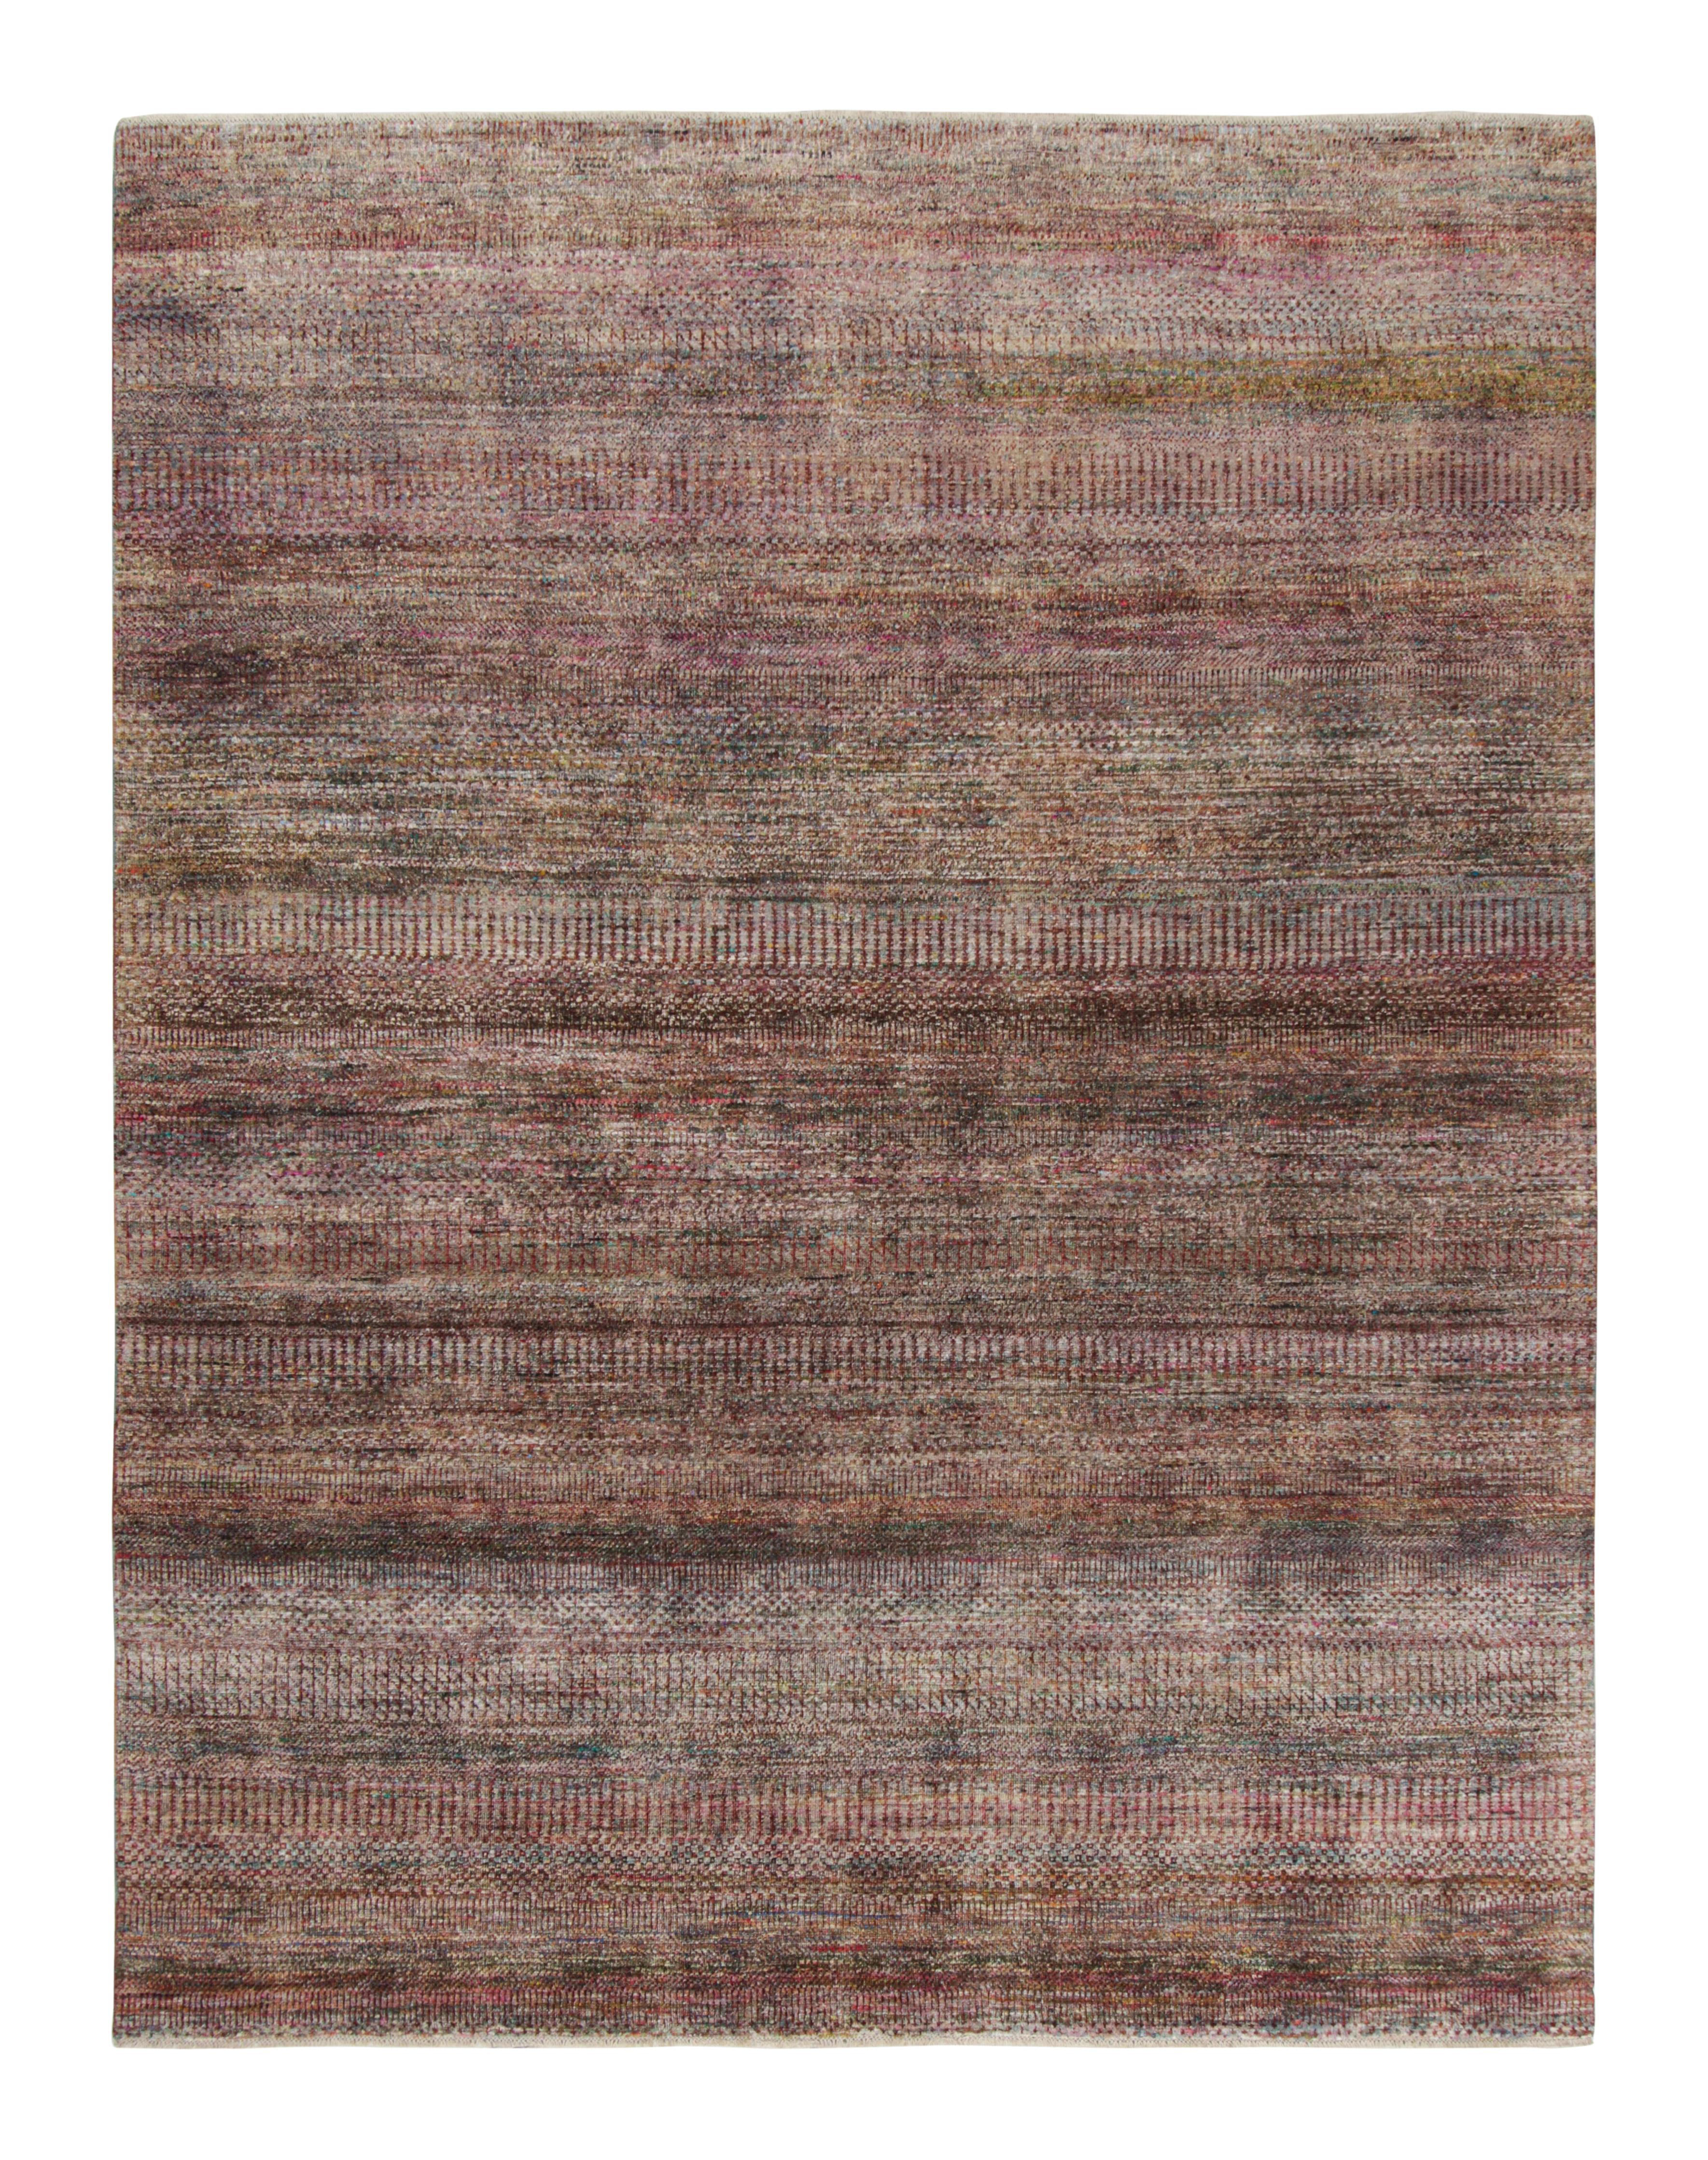 This 8x10 textural rug is an exciting new addition to the Texture of Color collection by Rug & Kilim, made with hand-knotted silk and a new take on the theme of this collection—particularly a vegetable dye like those used in antique or vintage rugs